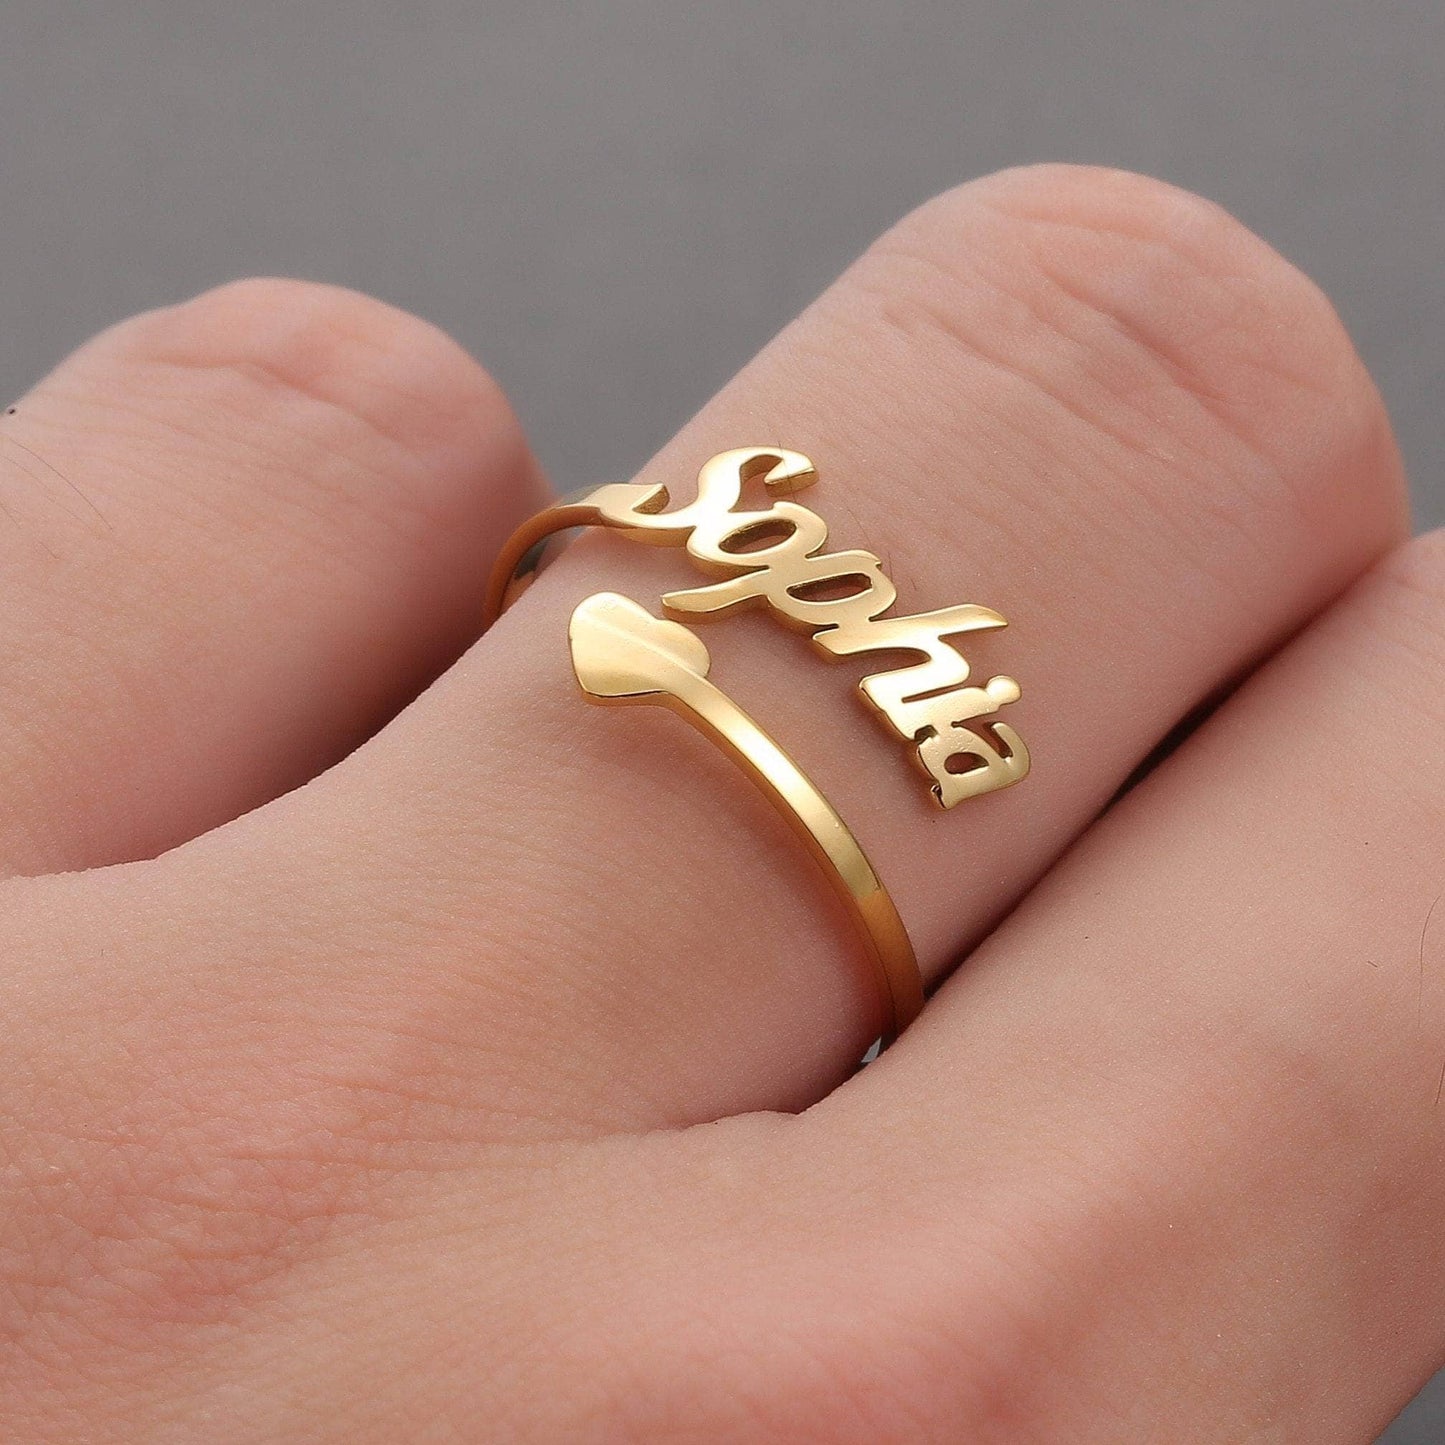 Adjustable Custom Ring Personalized Letter Heart Name Rings Stainless Steel  Love Wedding Ring For Women Anniversary Jewelry - Customized Rings -  AliExpress